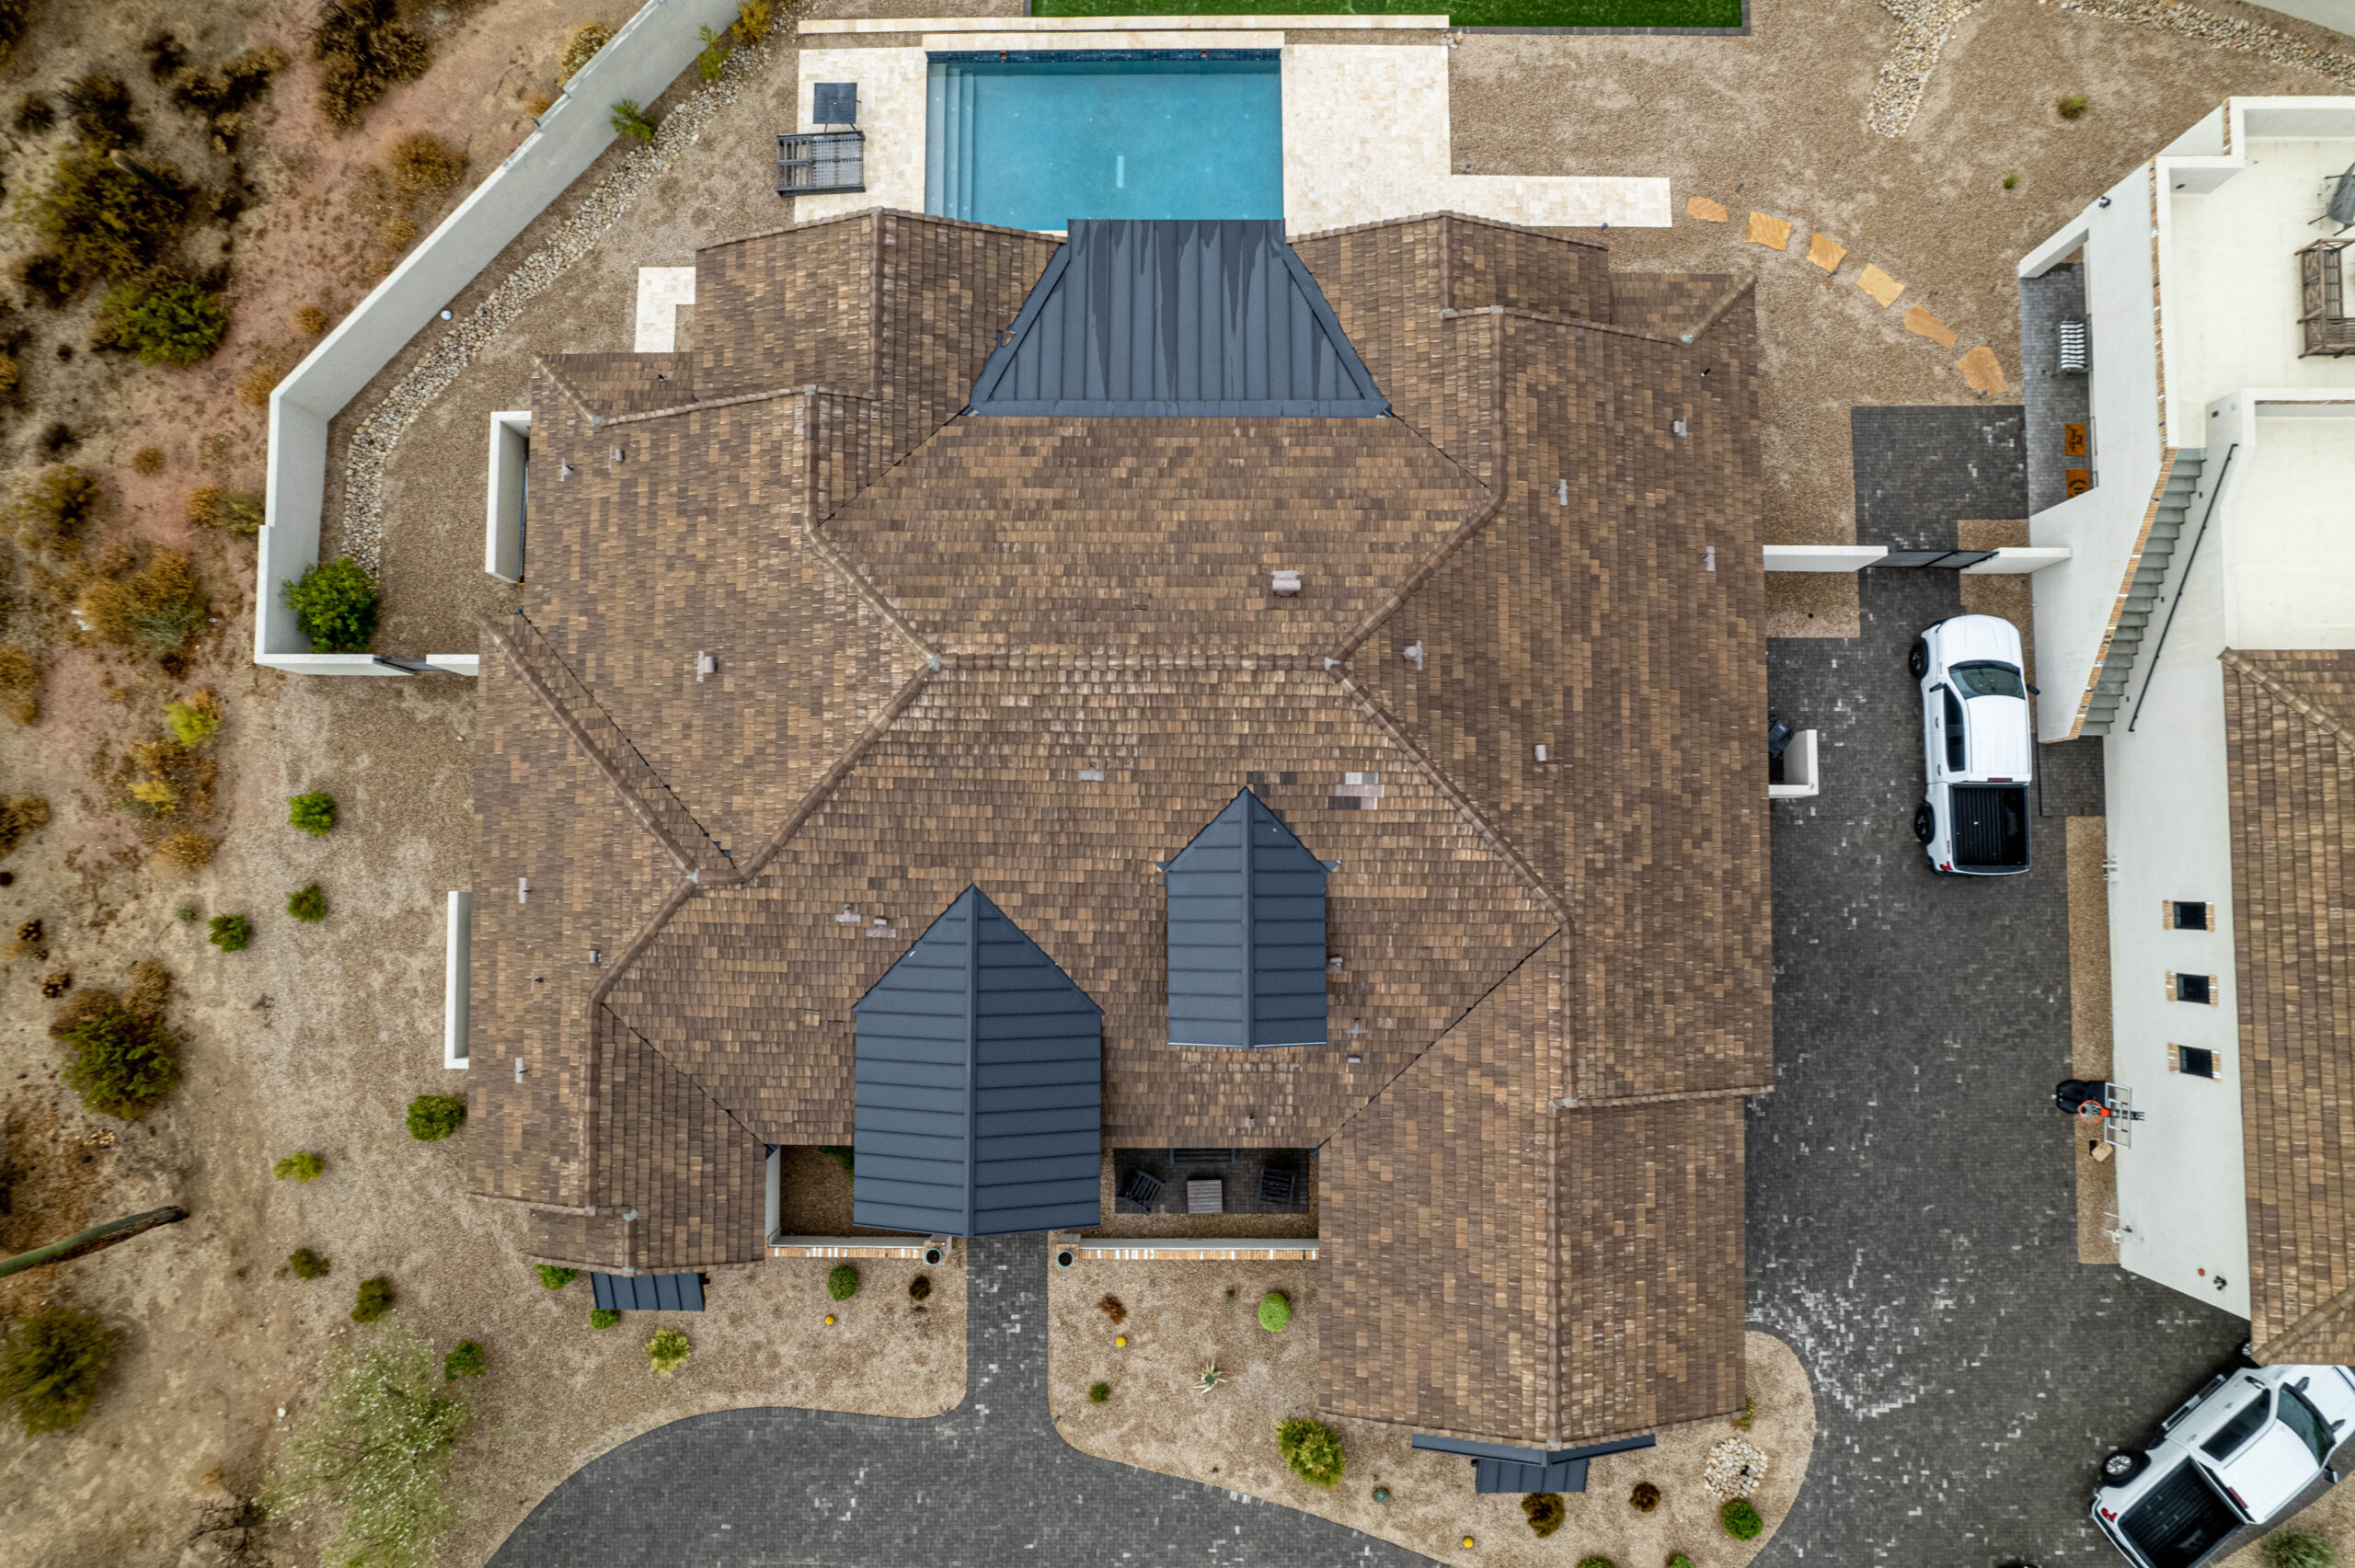 Aerial view showcasing intricate tile roofing patterns in Estancia.